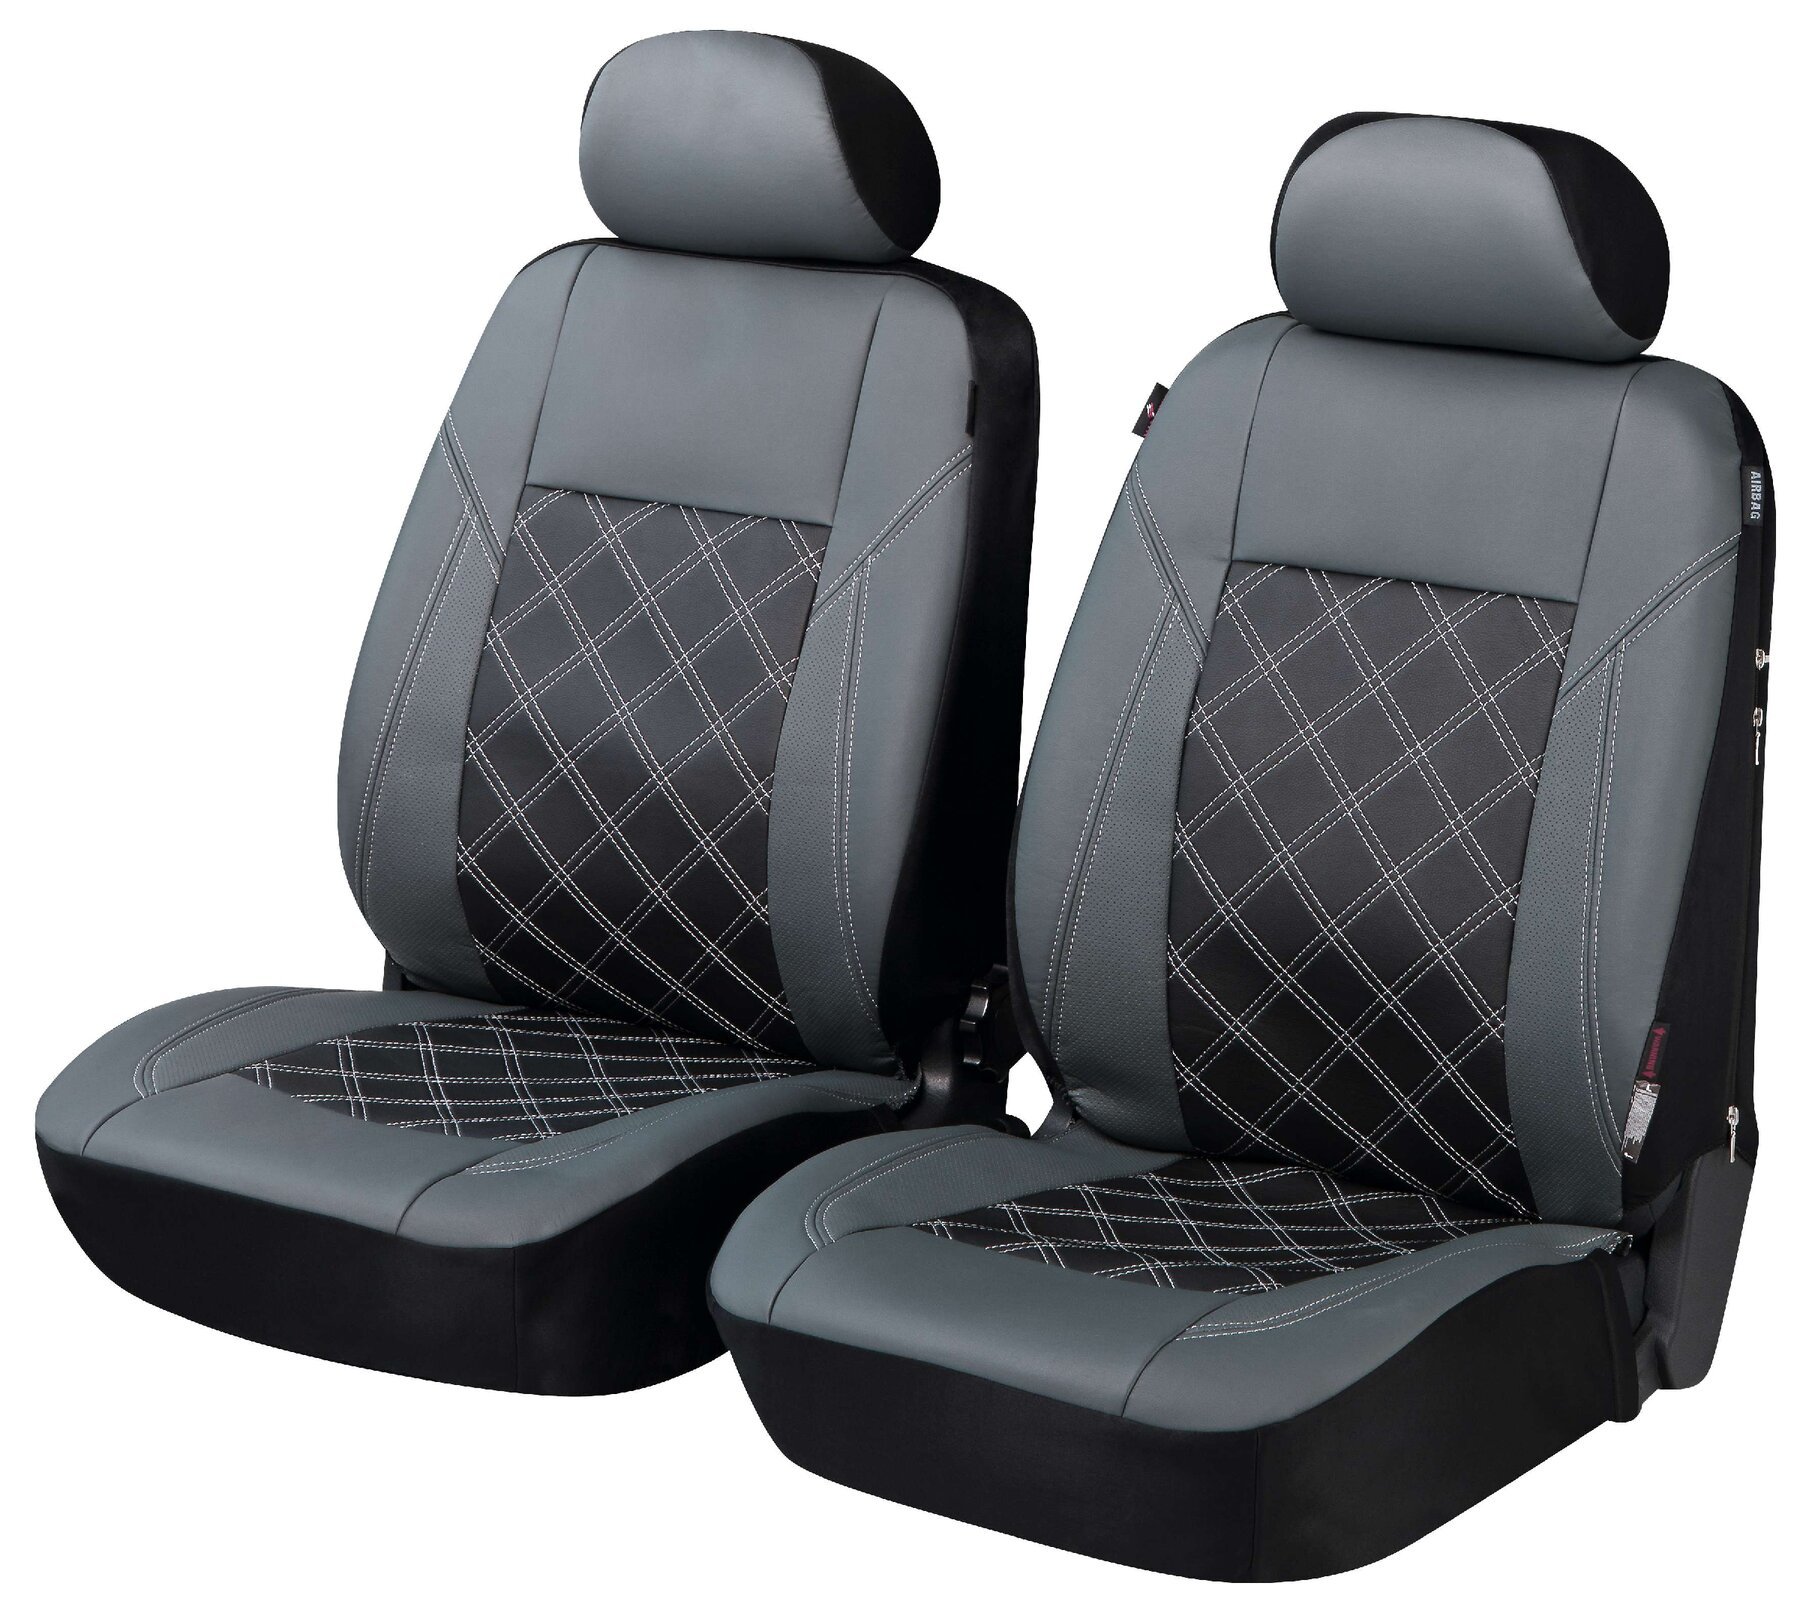 ZIPP IT Deluxe Durham car Seat covers in imitation leather for two front seats with zipper system